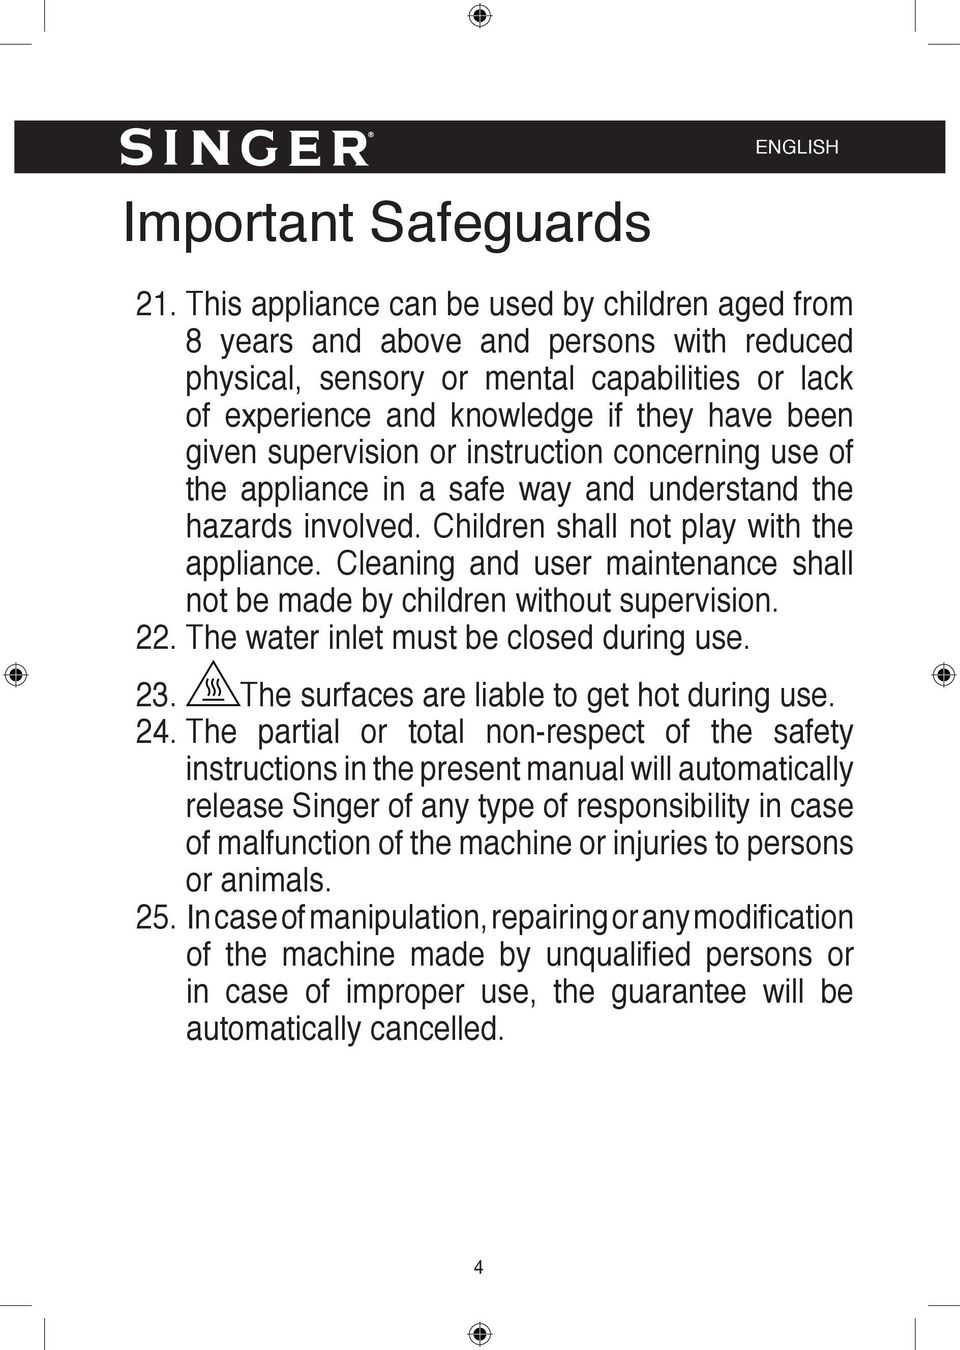 supervision or instruction concerning use of the appliance in a safe way and understand the hazards involved. Children shall not play with the appliance.